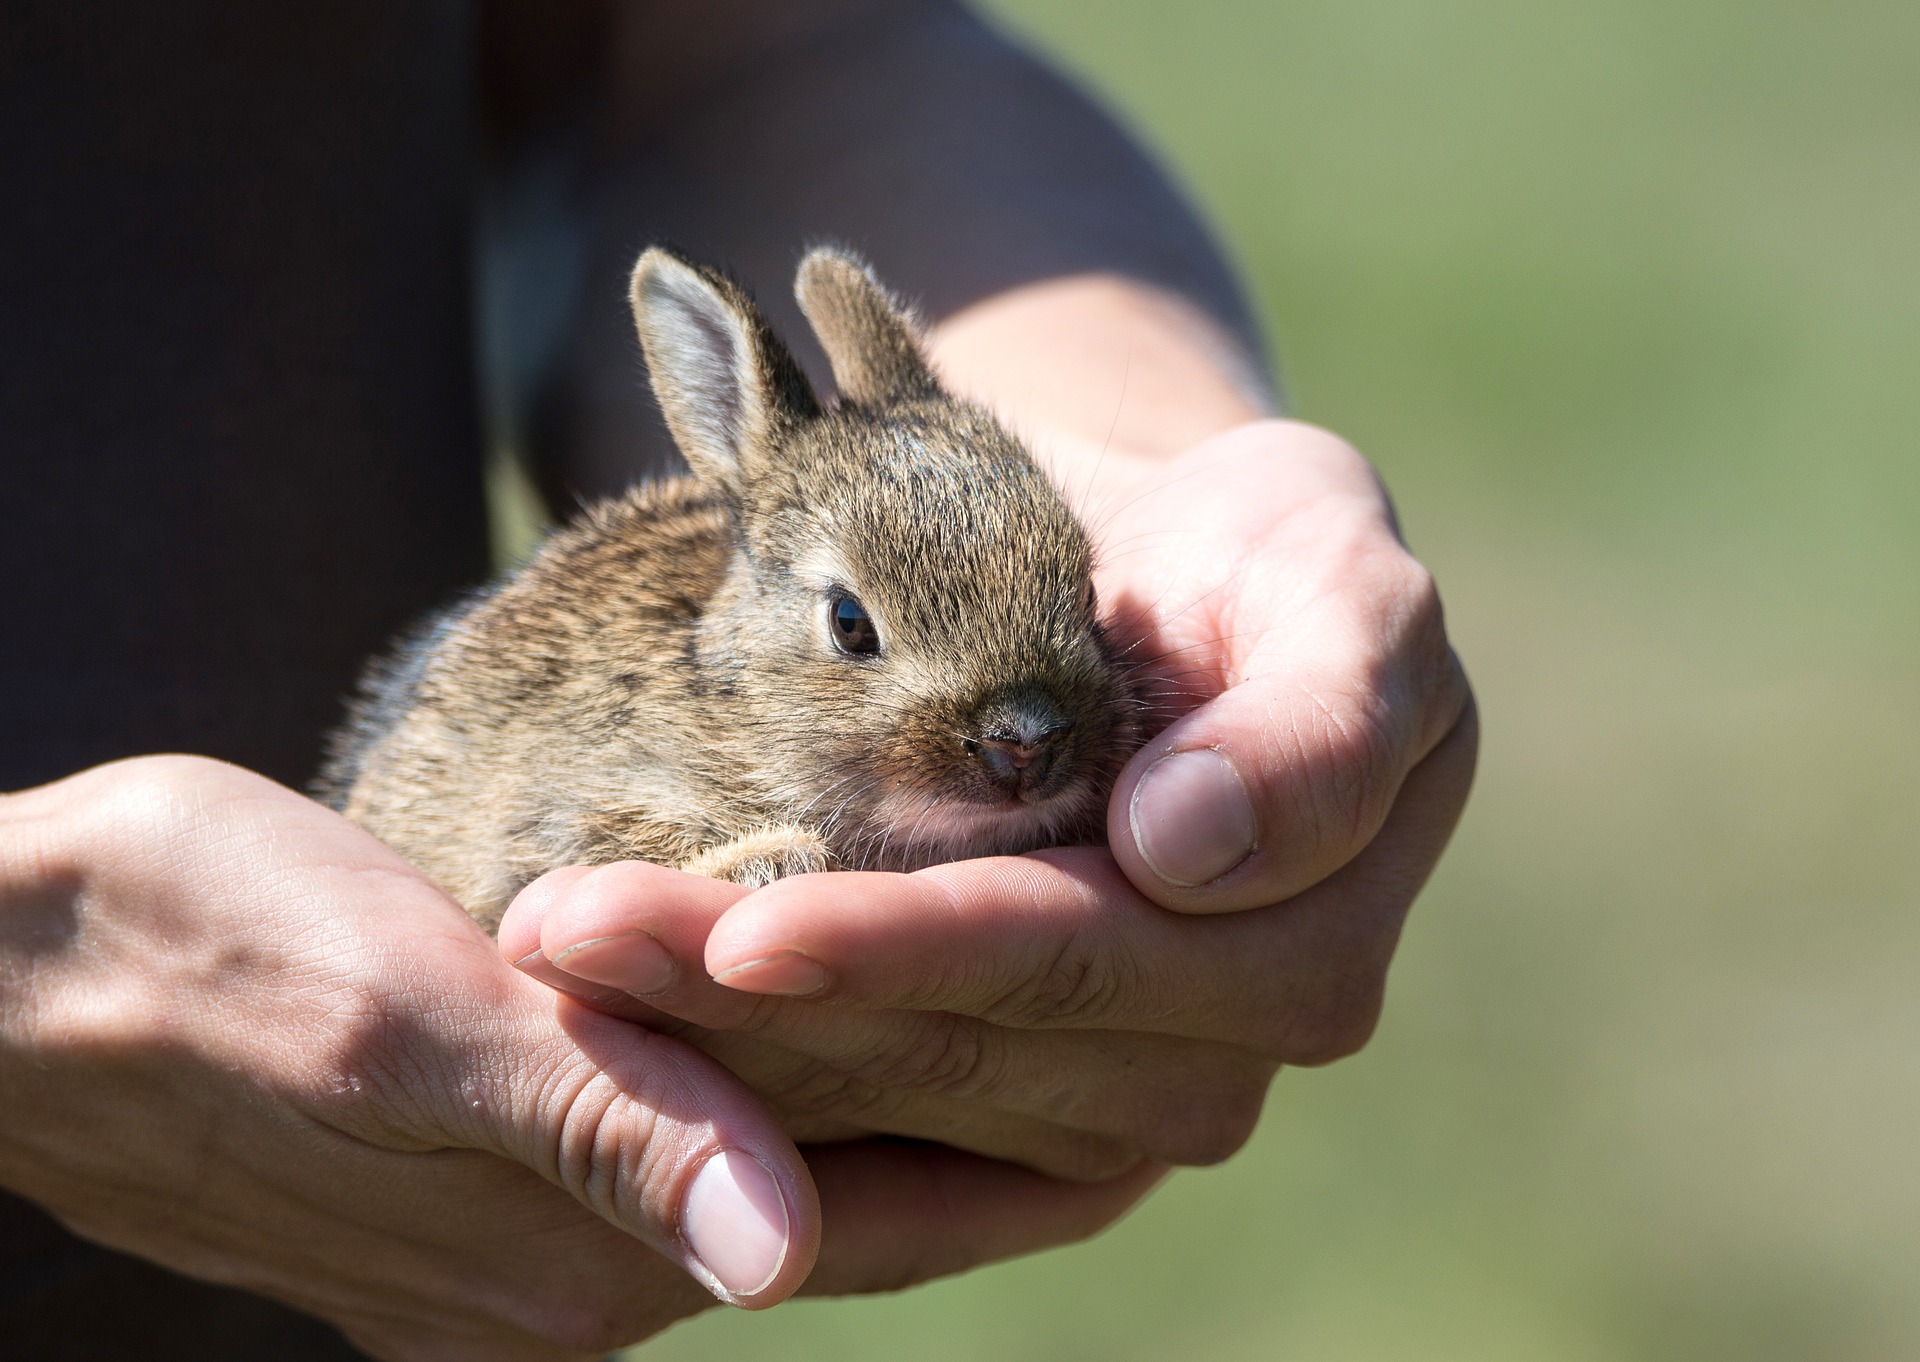 Image of human hands holding a small rabbit.